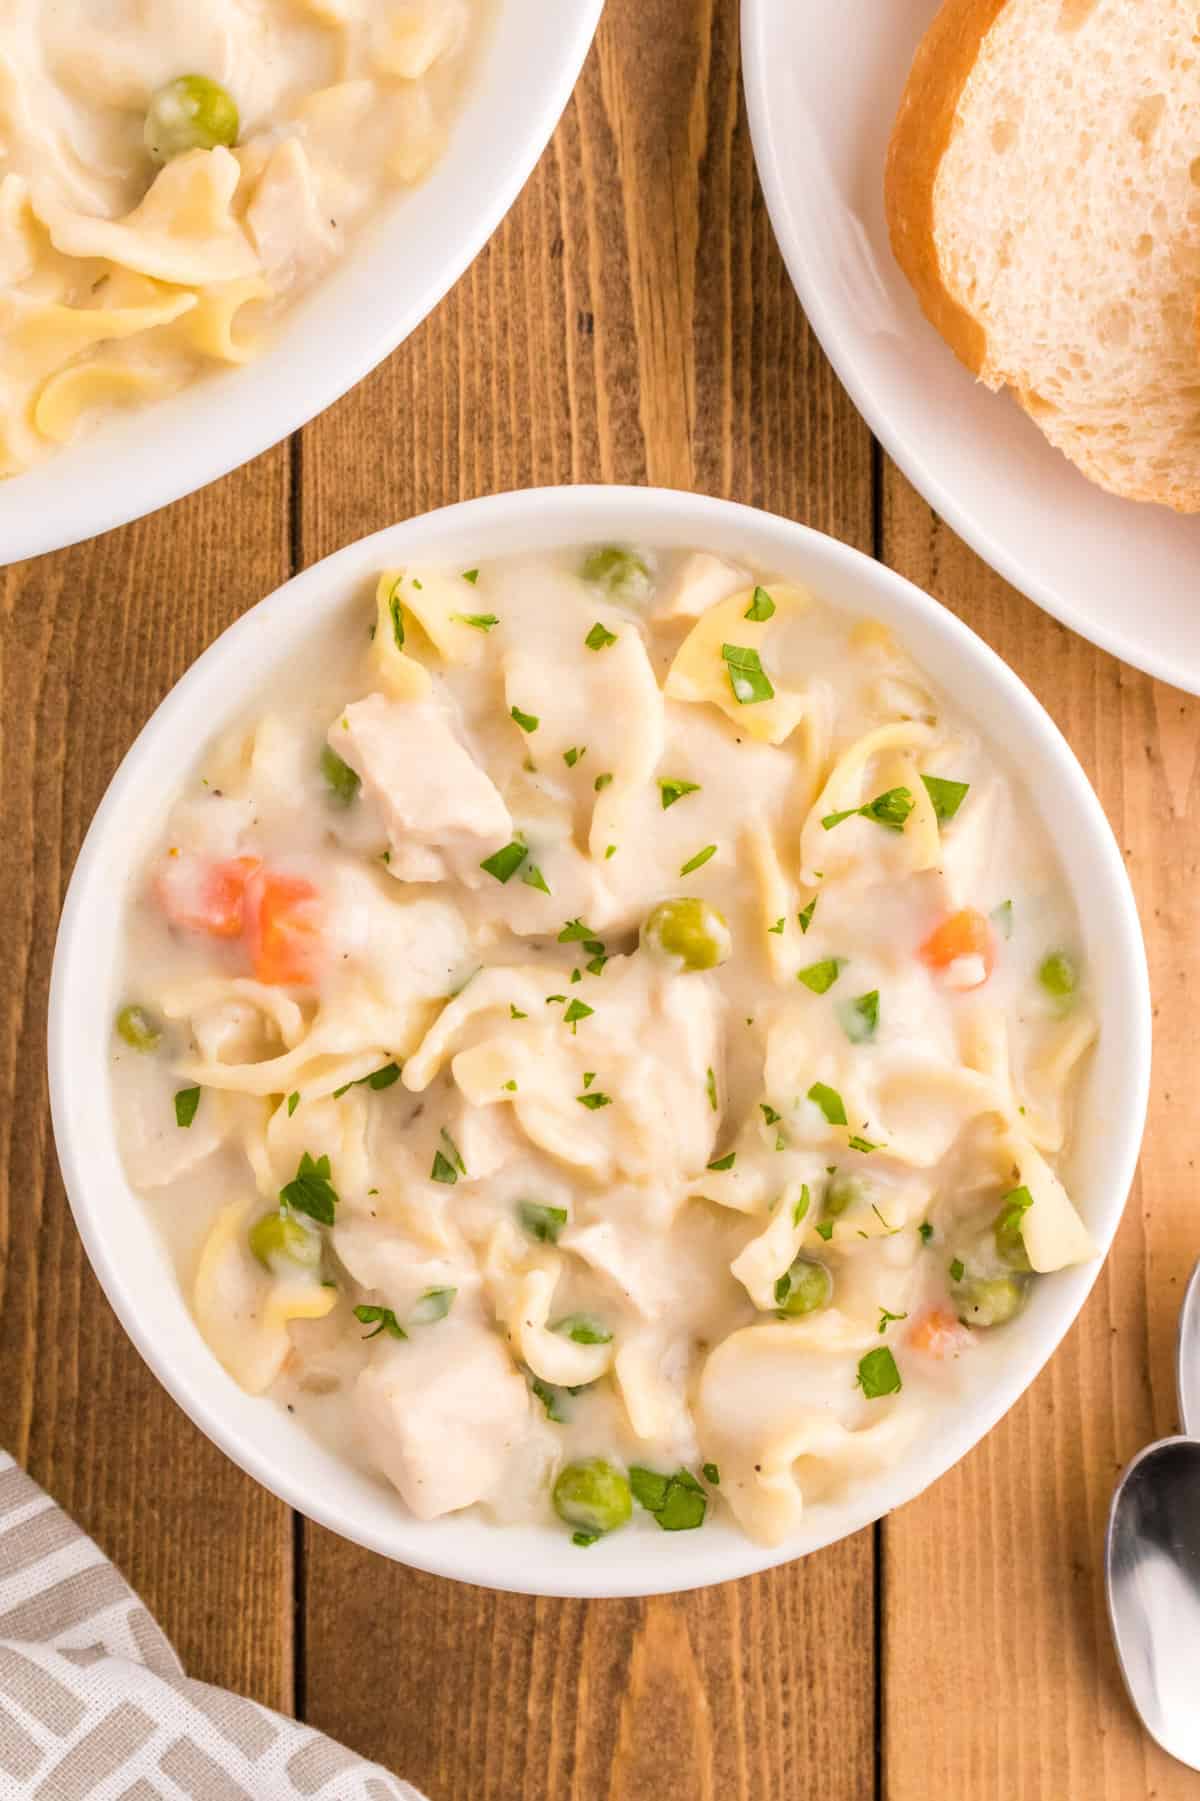 Bowls of creamy chicken noodle soup are placed on a wooden surface.